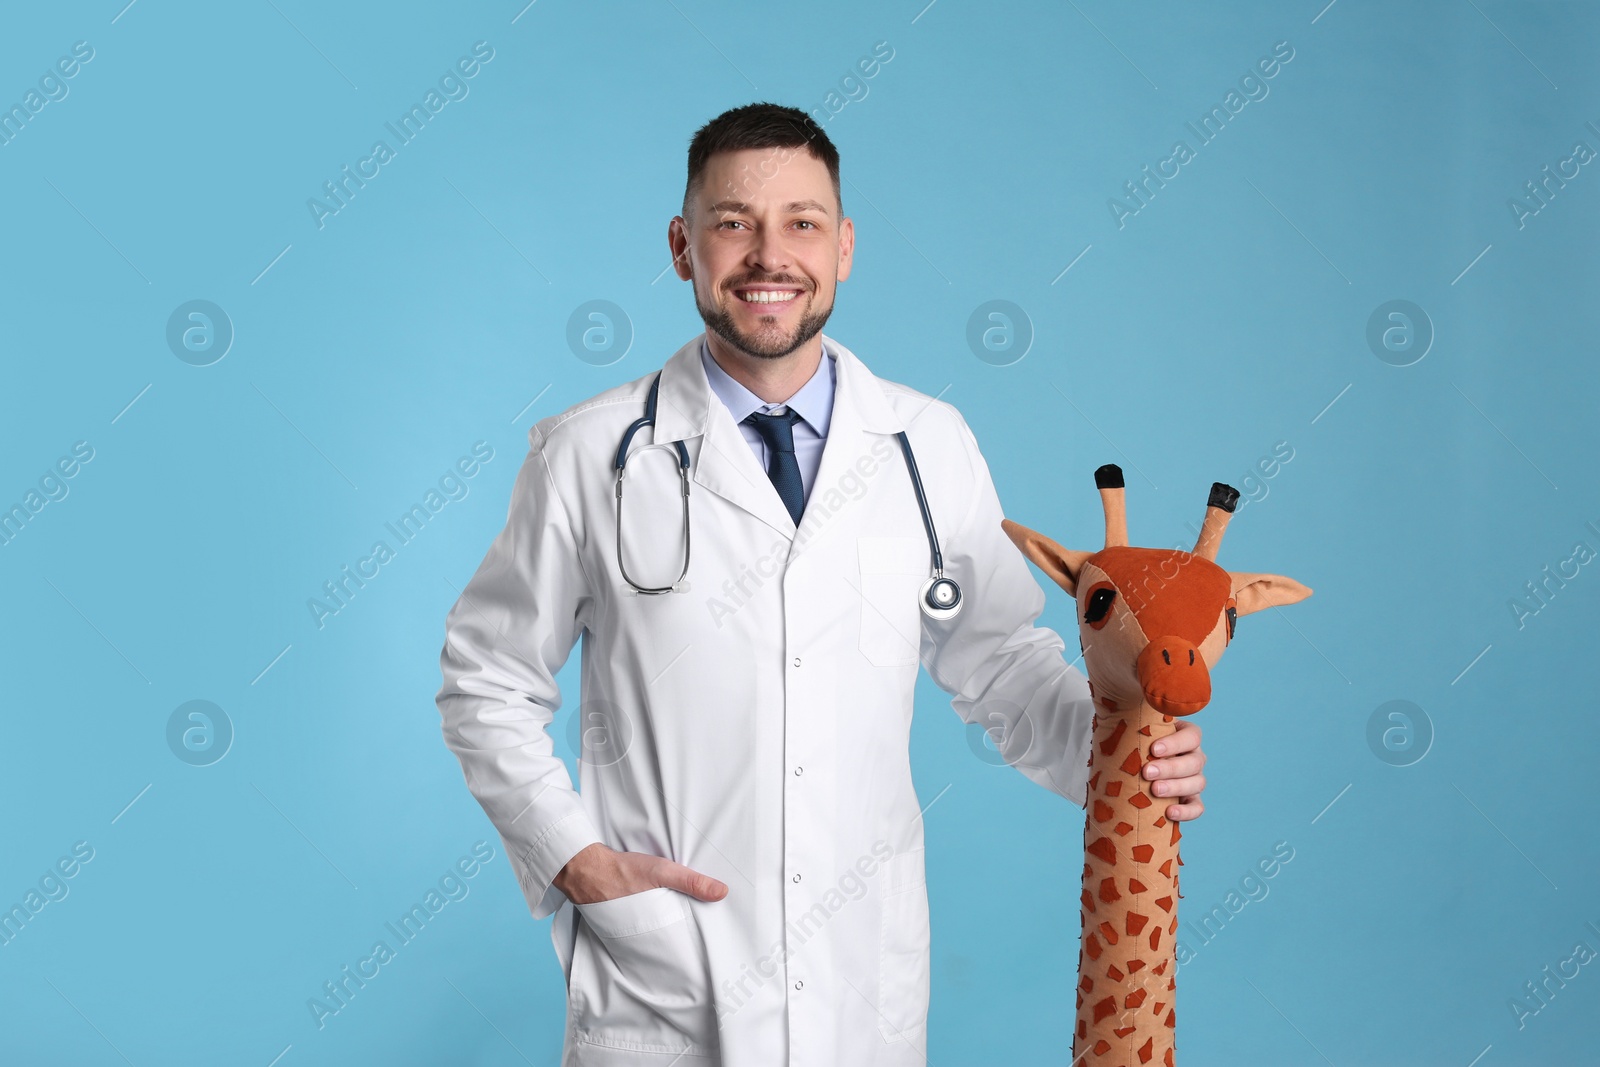 Photo of Pediatrician with toy giraffe and stethoscope on light blue background